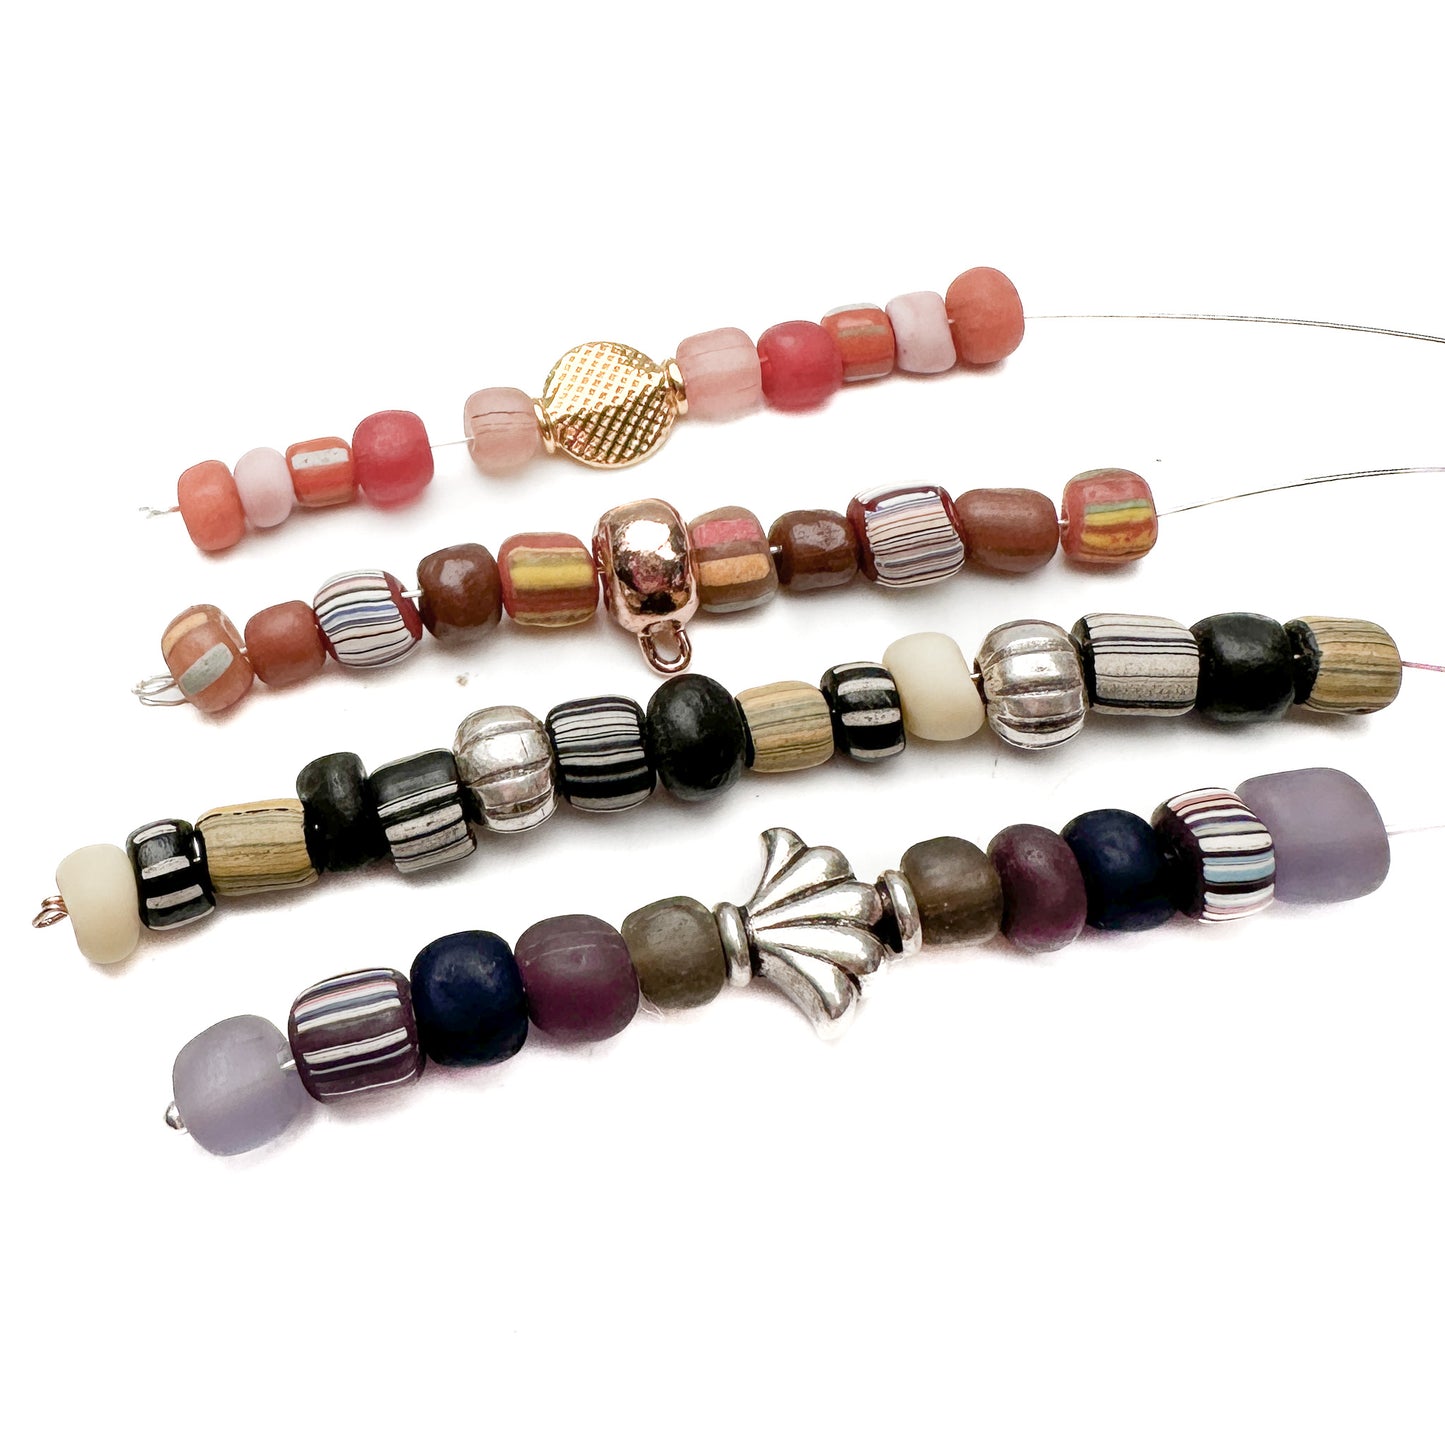 Java Glass Bead Mix (11 Color Options) - Approx. 86 pcs.-The Bead Gallery Honolulu